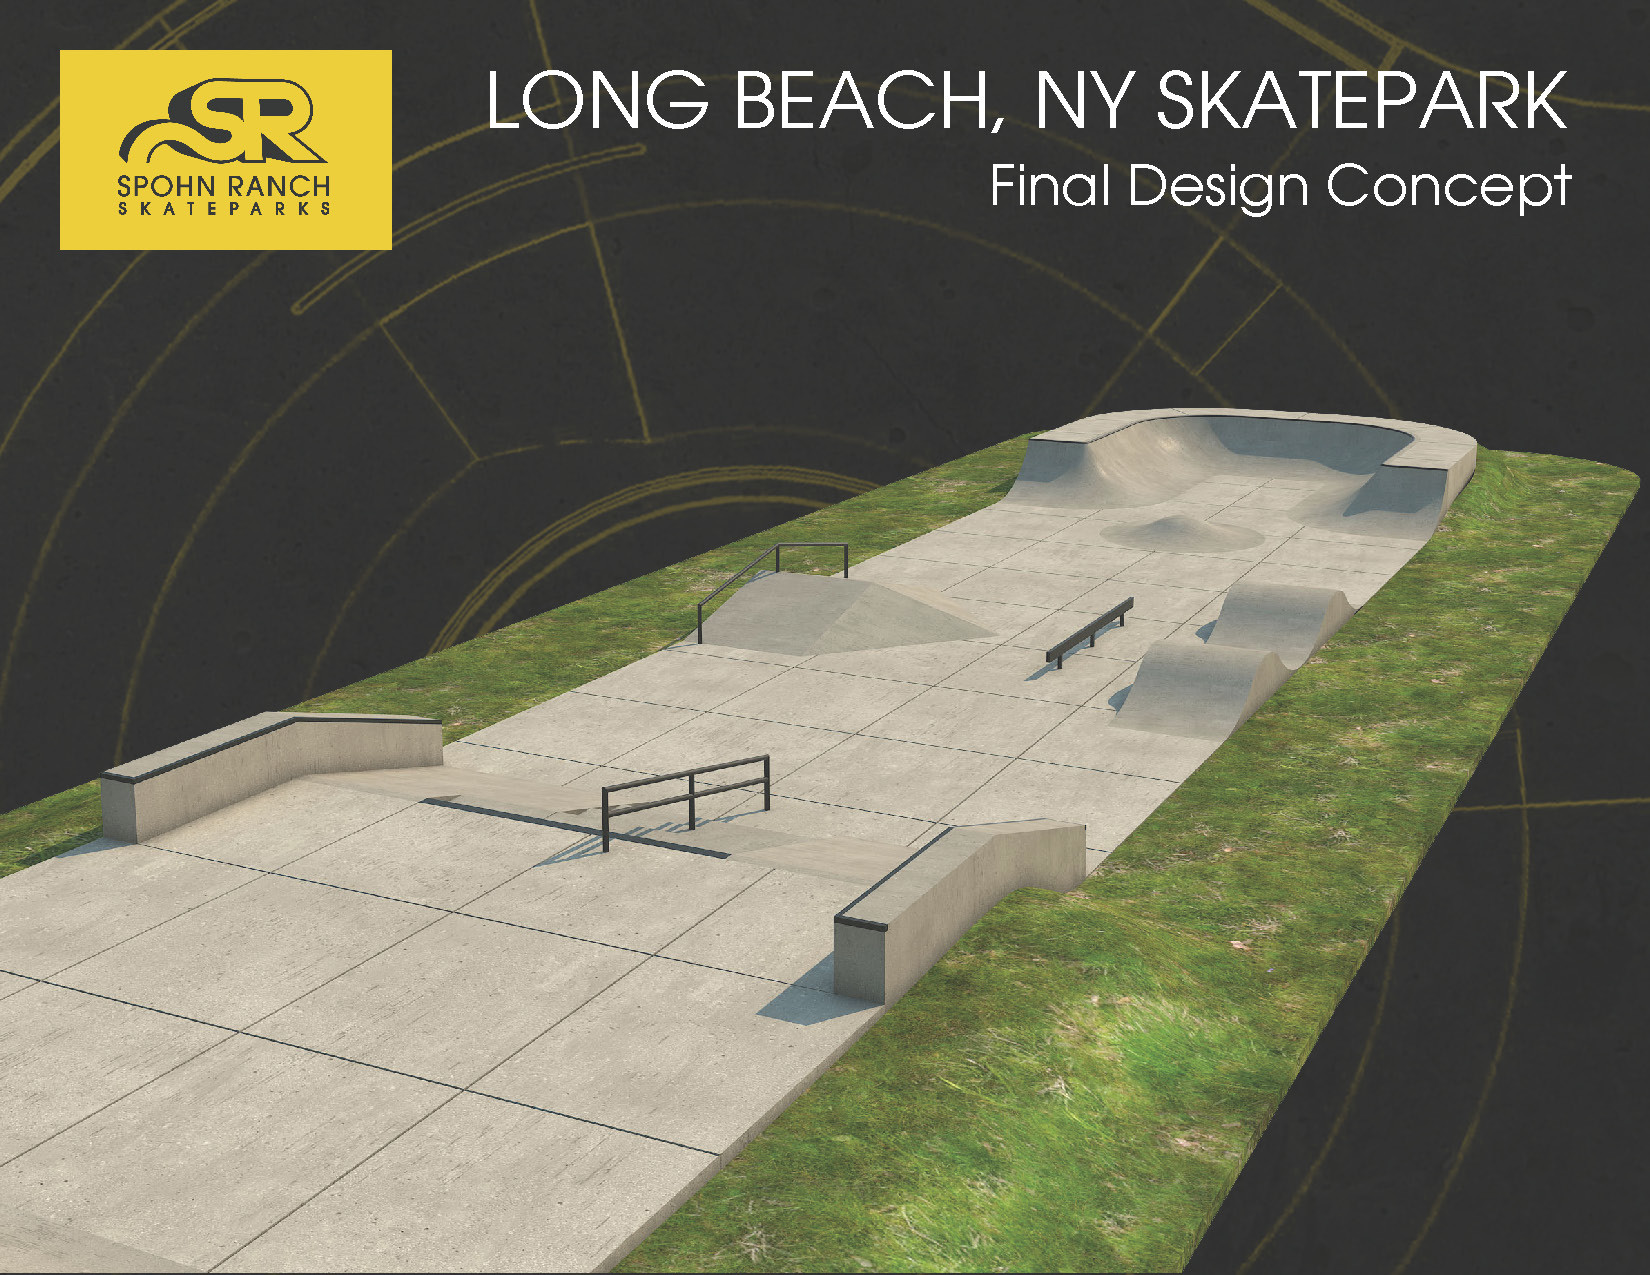 The first renderings of the finalized design for the new skate park.